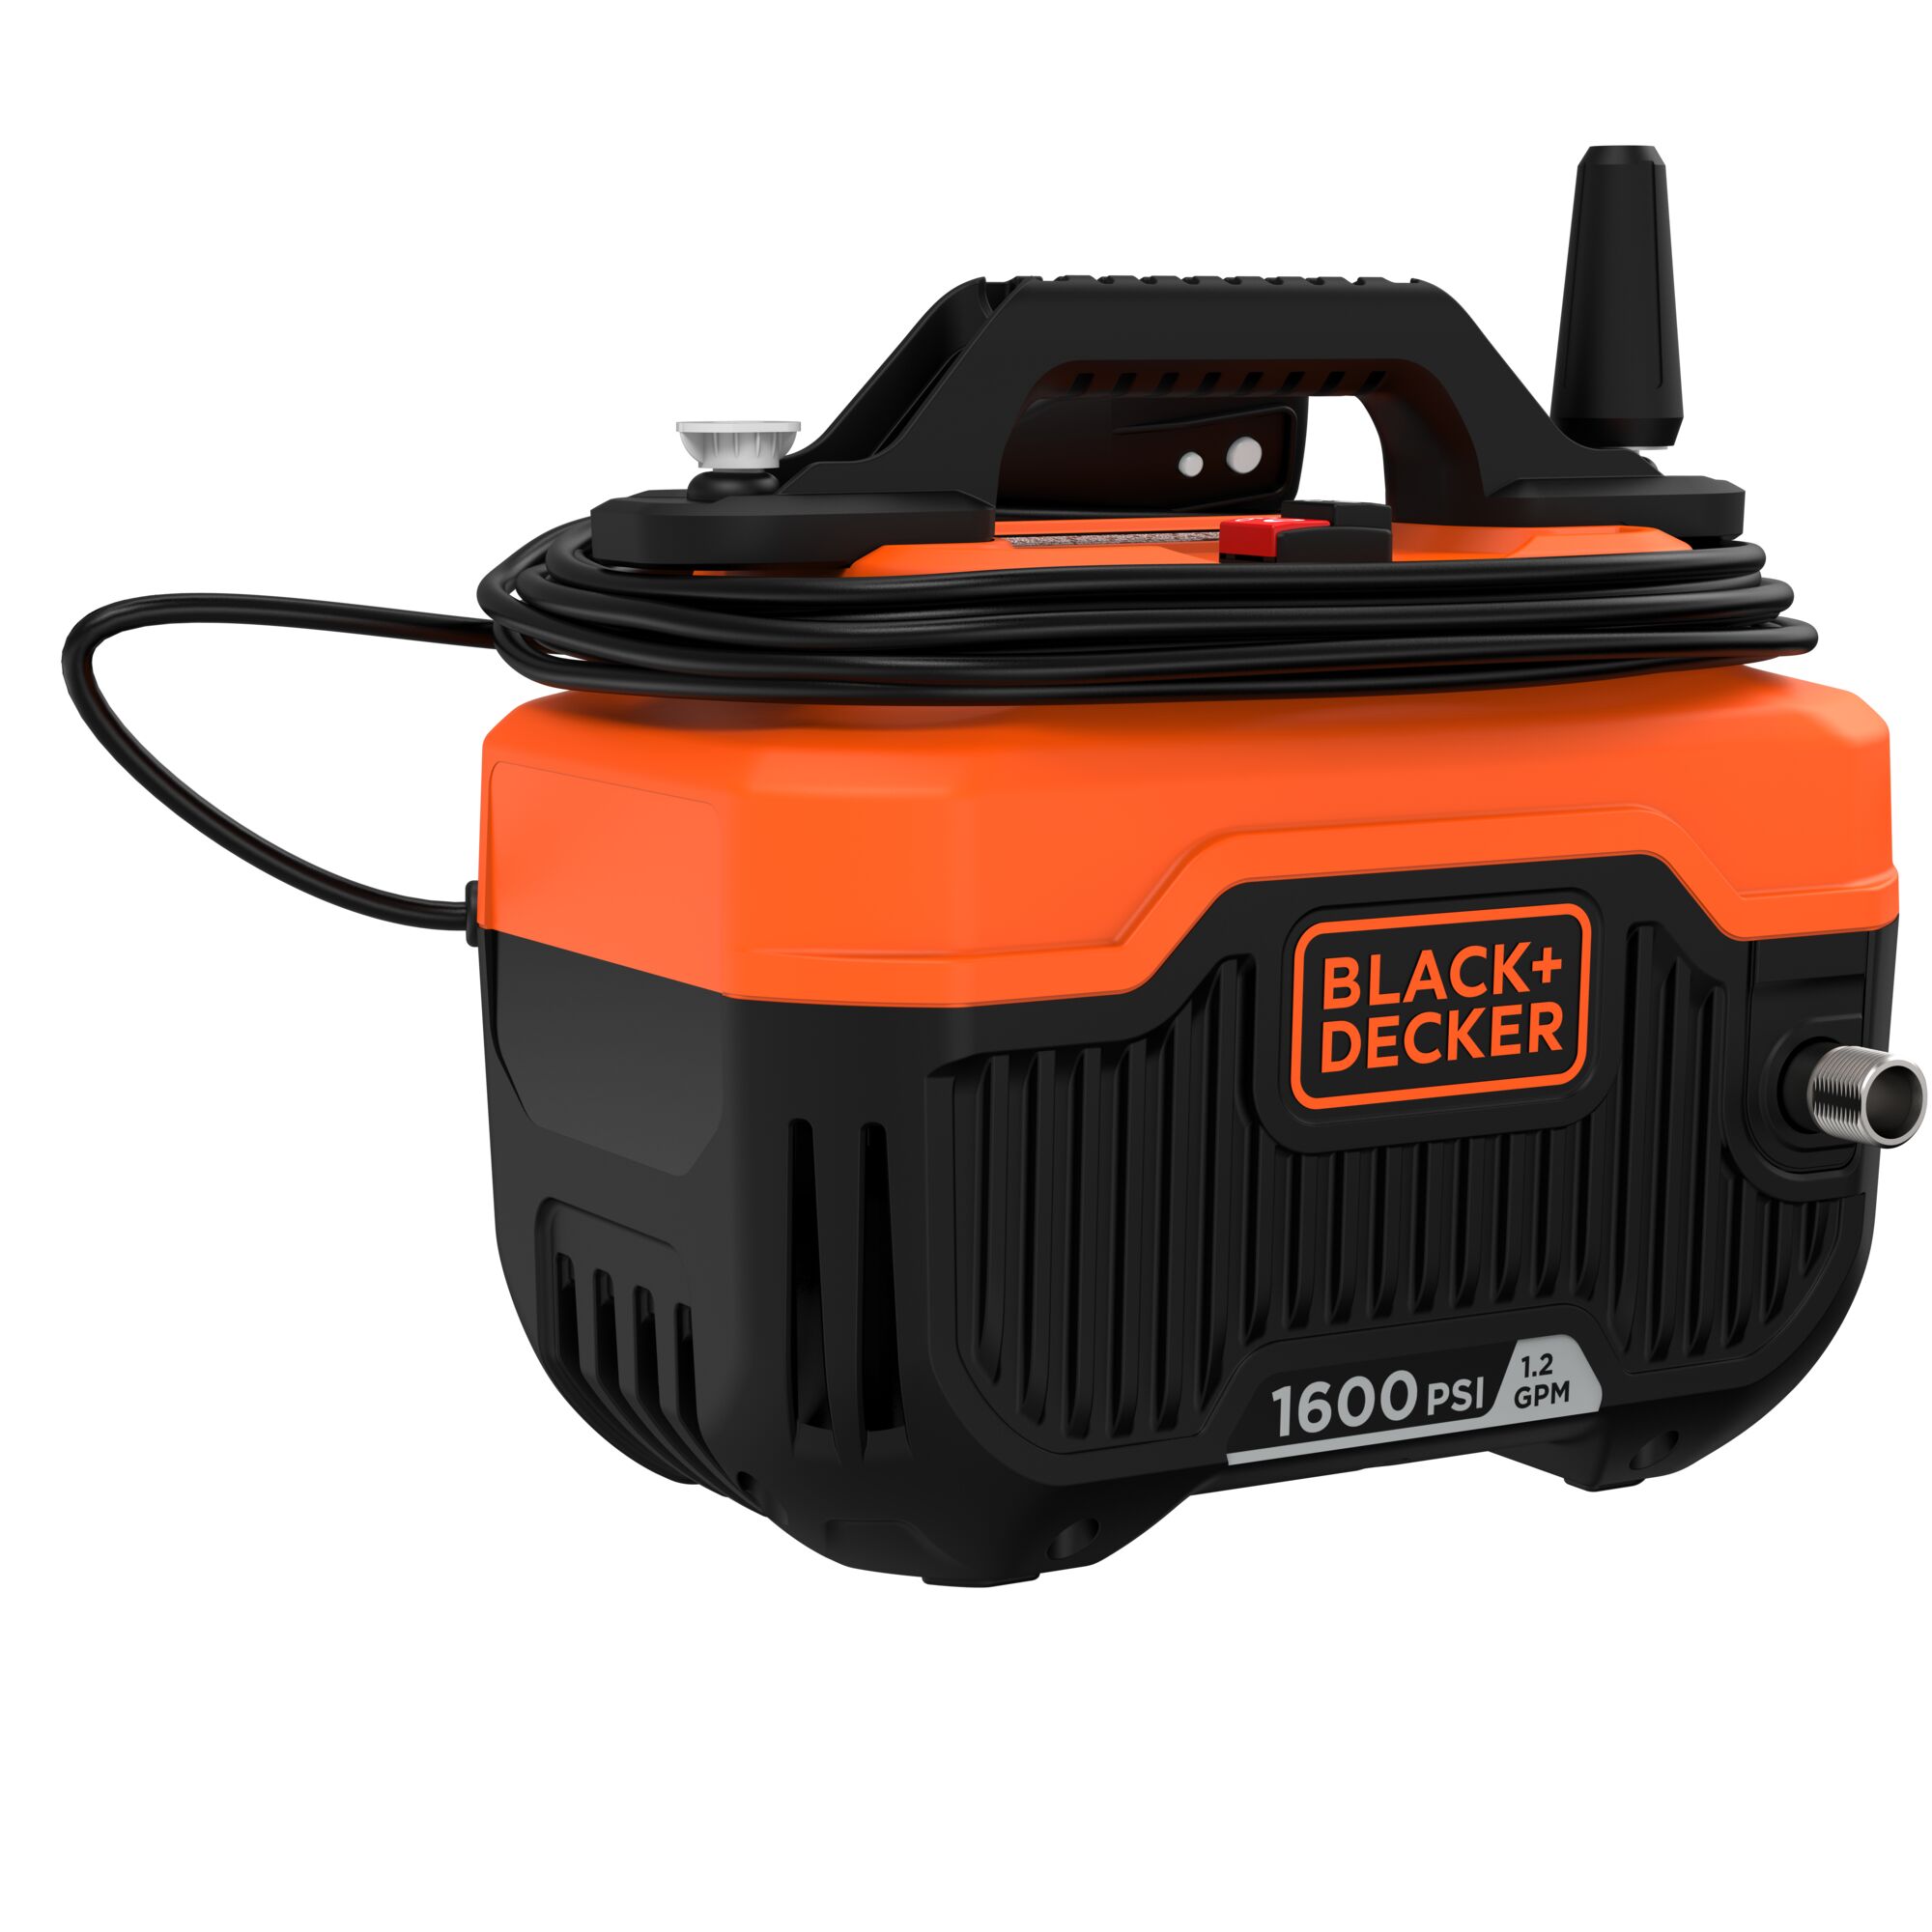 Profile of Black and decker 1600 watts high pressure washer.